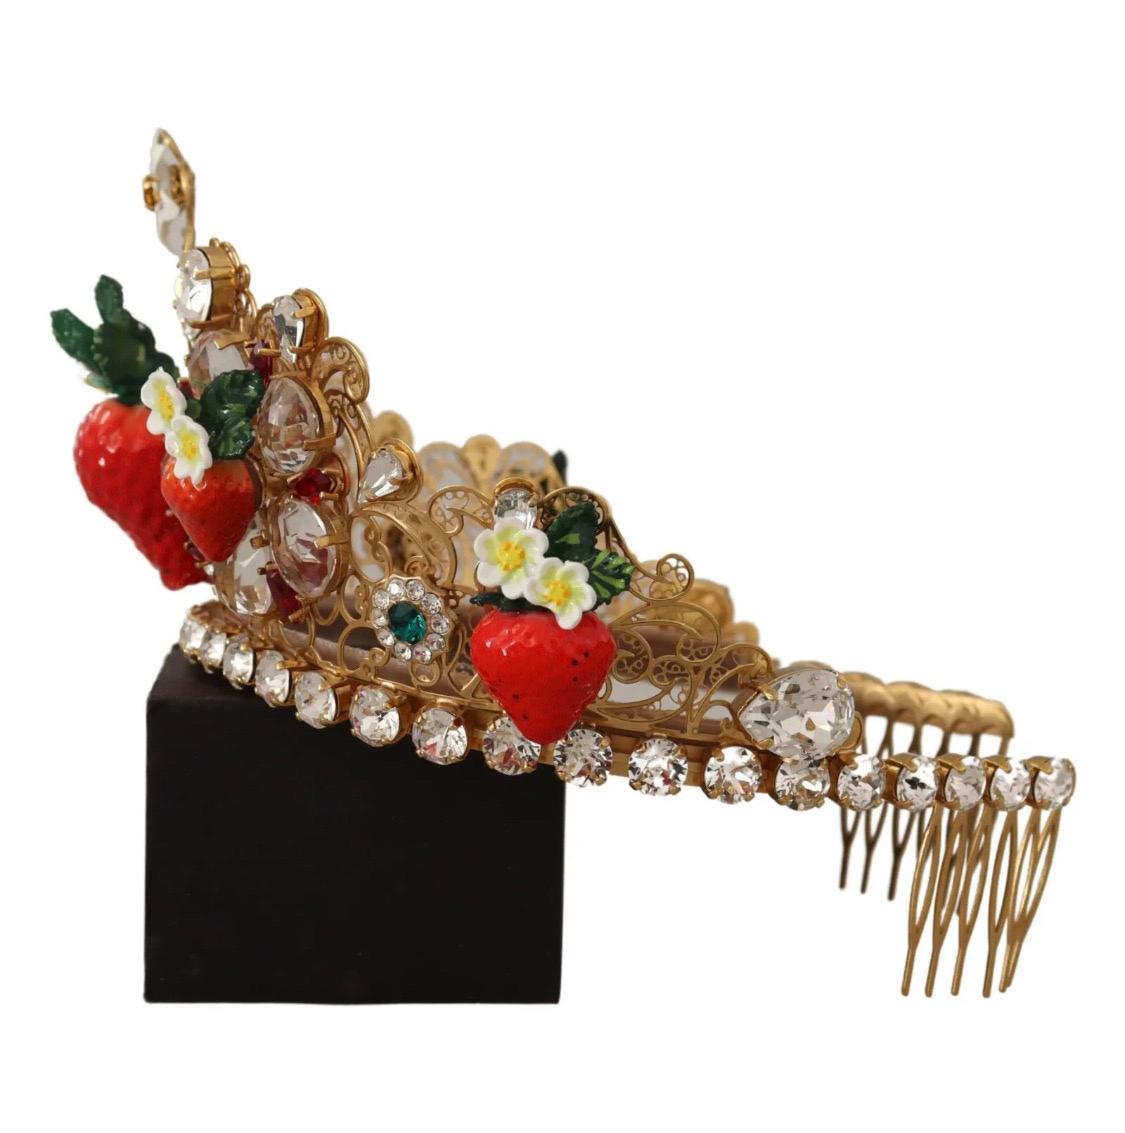 DOLCE & GABBANA

Absolutely stunning, 100% Authentic, brand new with tags Dolce & Gabbana crystal diadem tiarem
This item comes from the Exclusive MainLine Dolce & Gabbana Collection.

Color: Clear, gold, red
Material: Brass, crystals
Clear